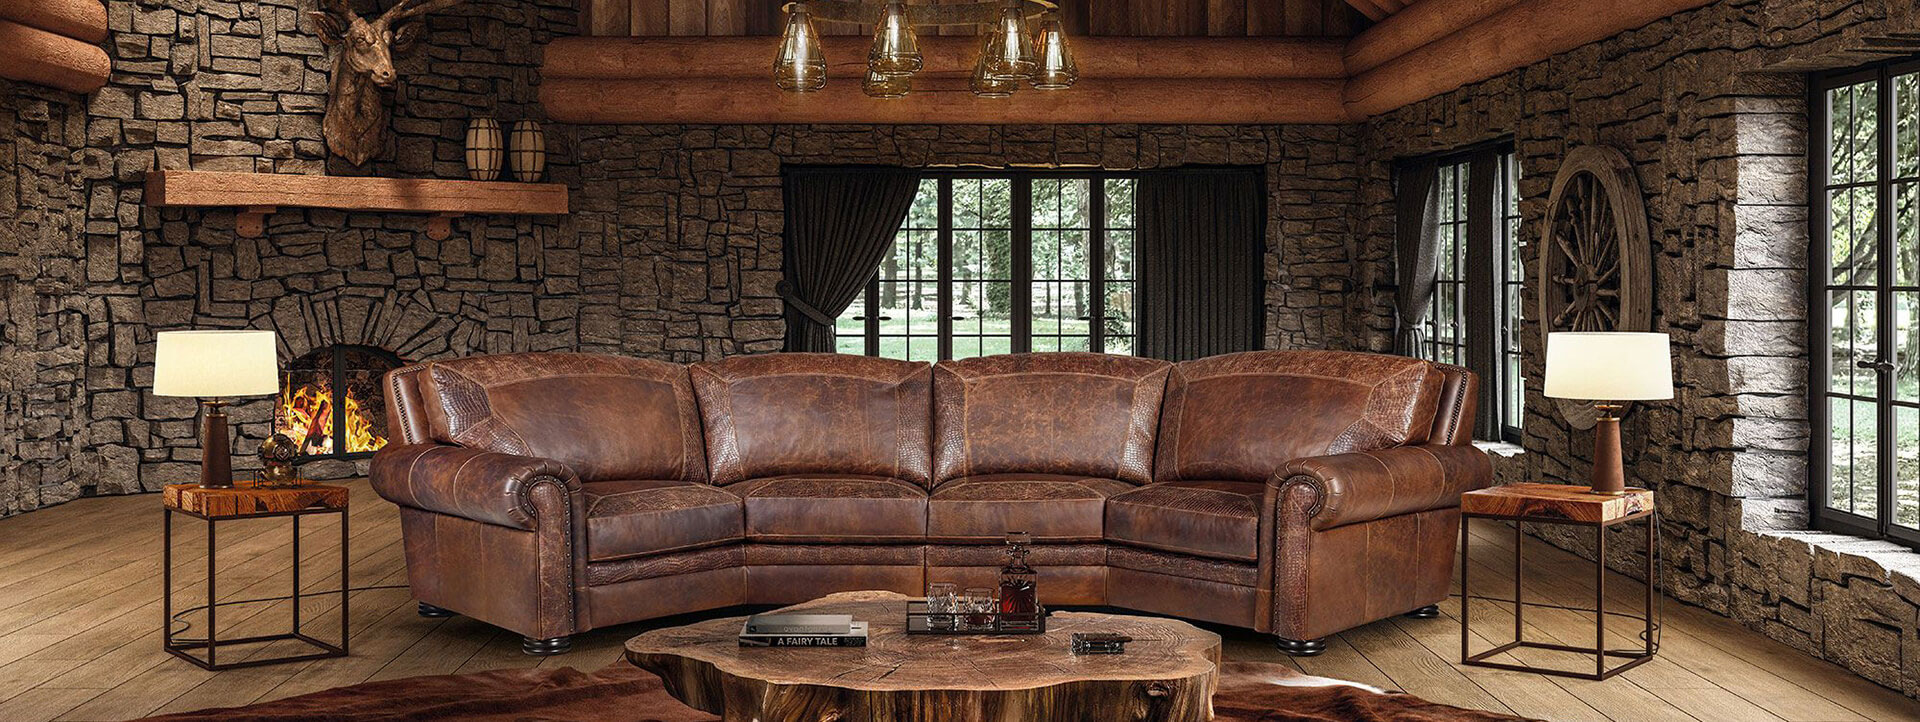 Austin Leather Furniture Gallery, Rustic Leather Furniture Texas